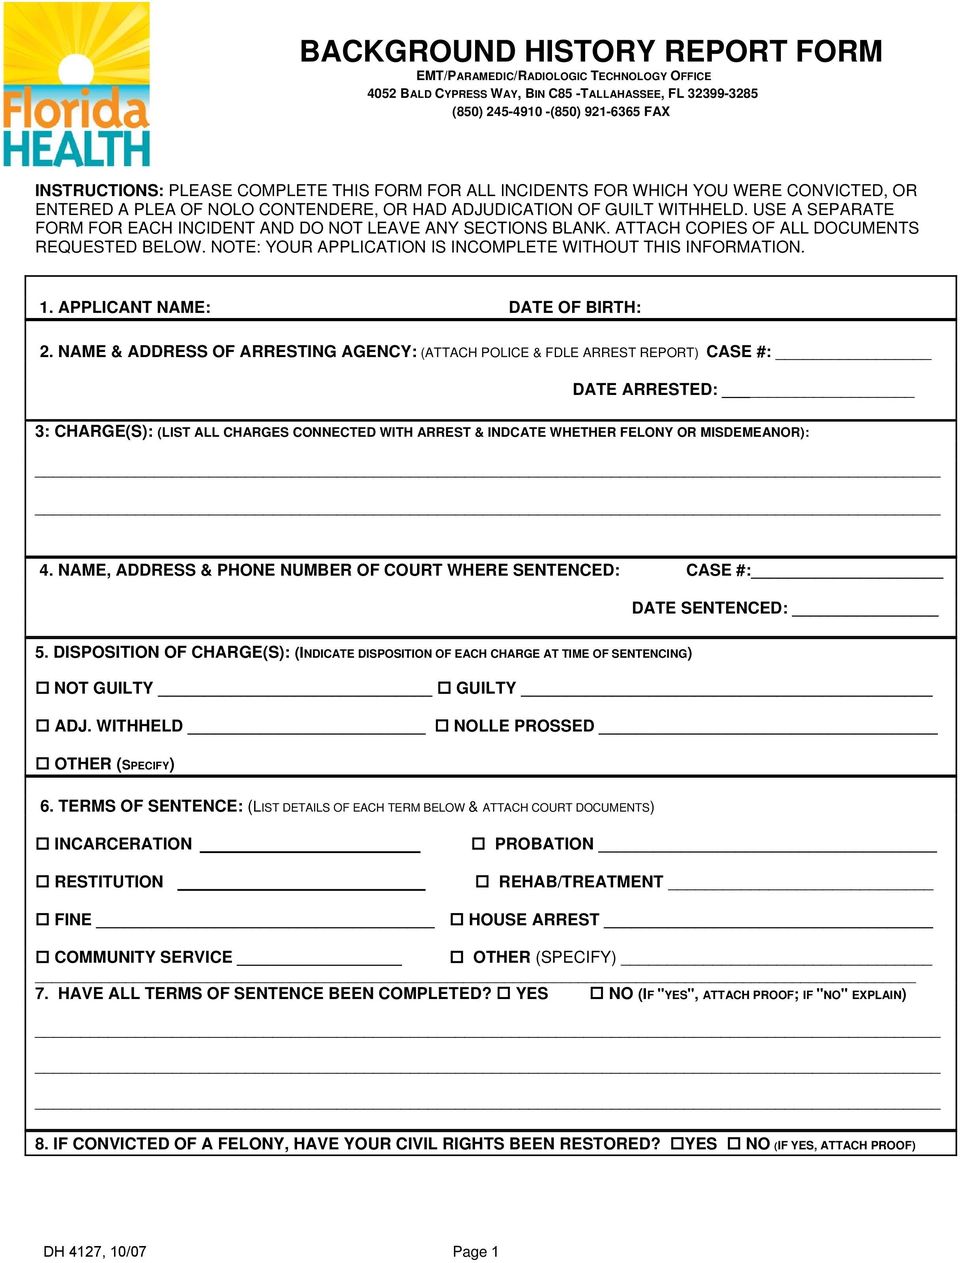 USE A SEPARATE FORM FOR EACH INCIDENT AND DO NOT LEAVE ANY SECTIONS BLANK. ATTACH COPIES OF ALL DOCUMENTS REQUESTED BELOW. NOTE: YOUR APPLICATION IS INCOMPLETE WITHOUT THIS INFORMATION. 1.